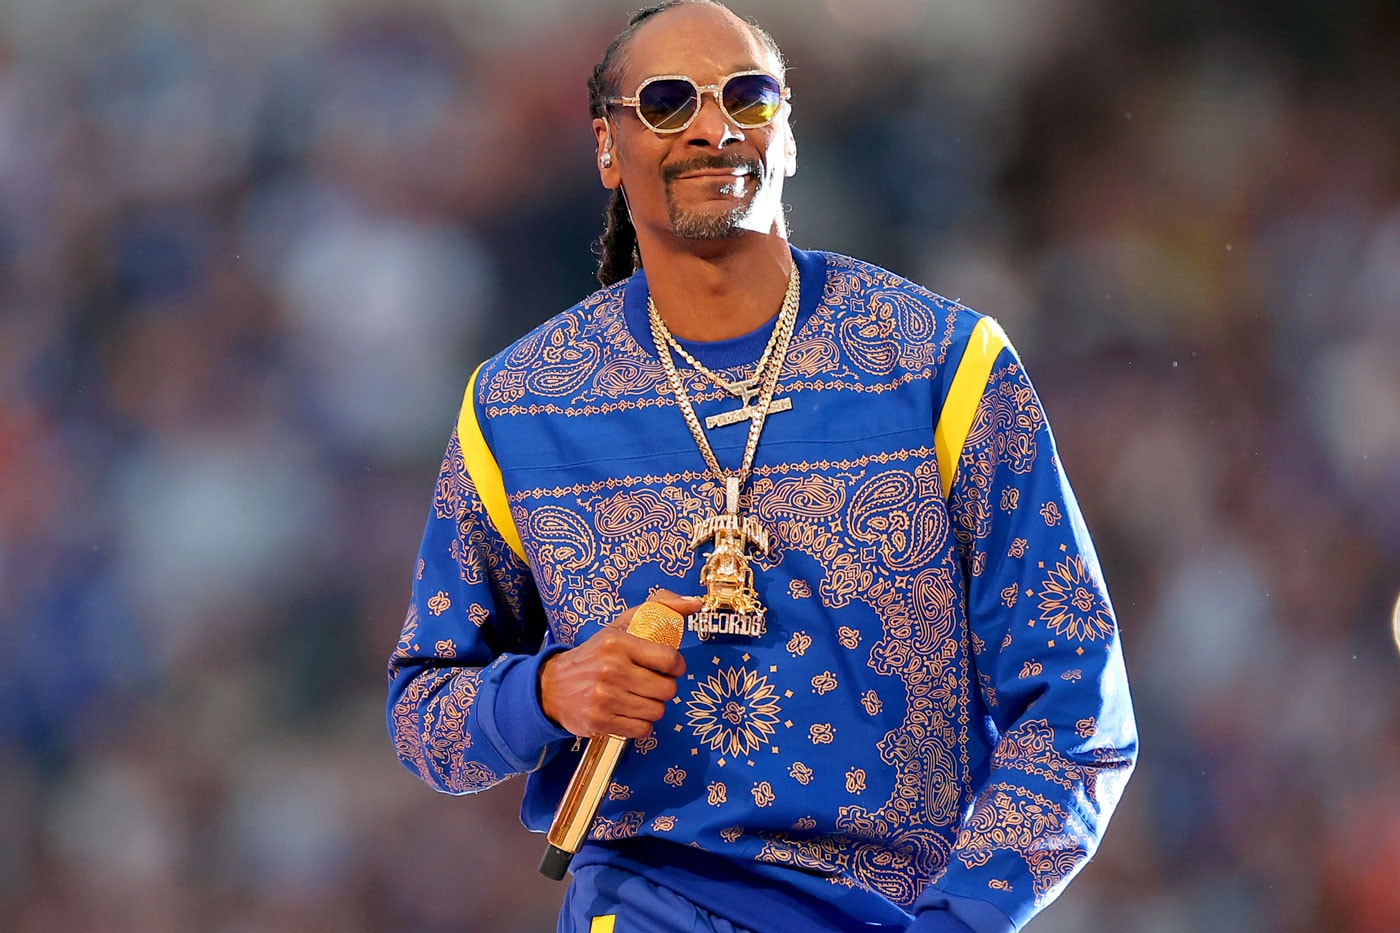 Snoop Dogg Is Making Death Row Records an NFT Label Snoop Dogg Releases Official NFT for New Album 'B.O.D.R' bacc on death row acquisition rapper hip hop super bowl lvi non fungible tokens kendrick lamar eminem mary j. blige dr. dre blockchain cryptocurrency gala games